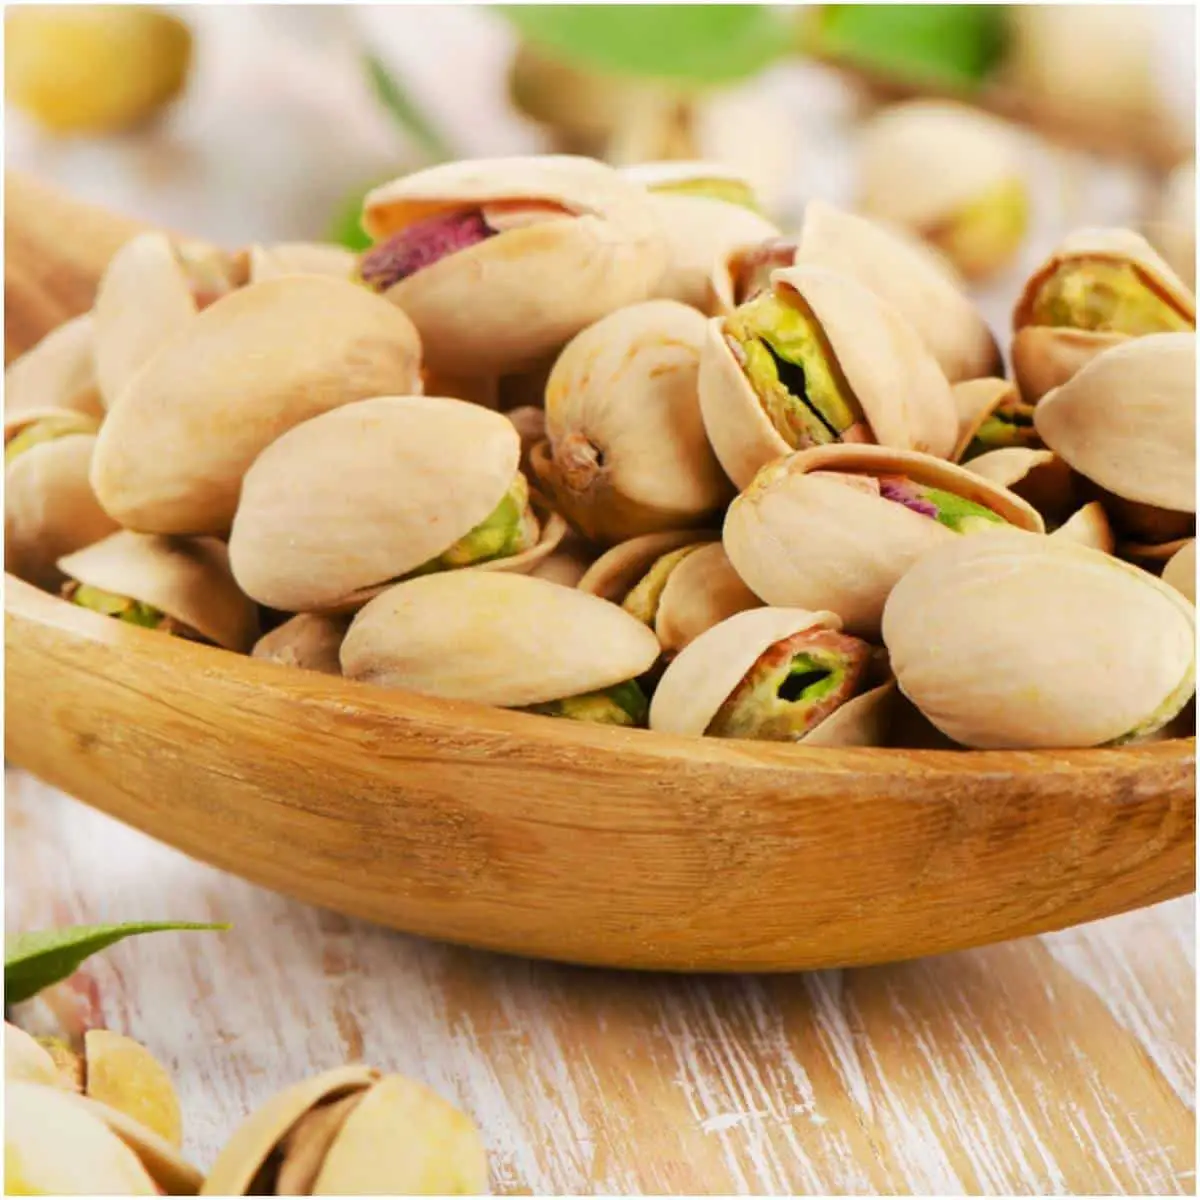 side effects of Pistachios